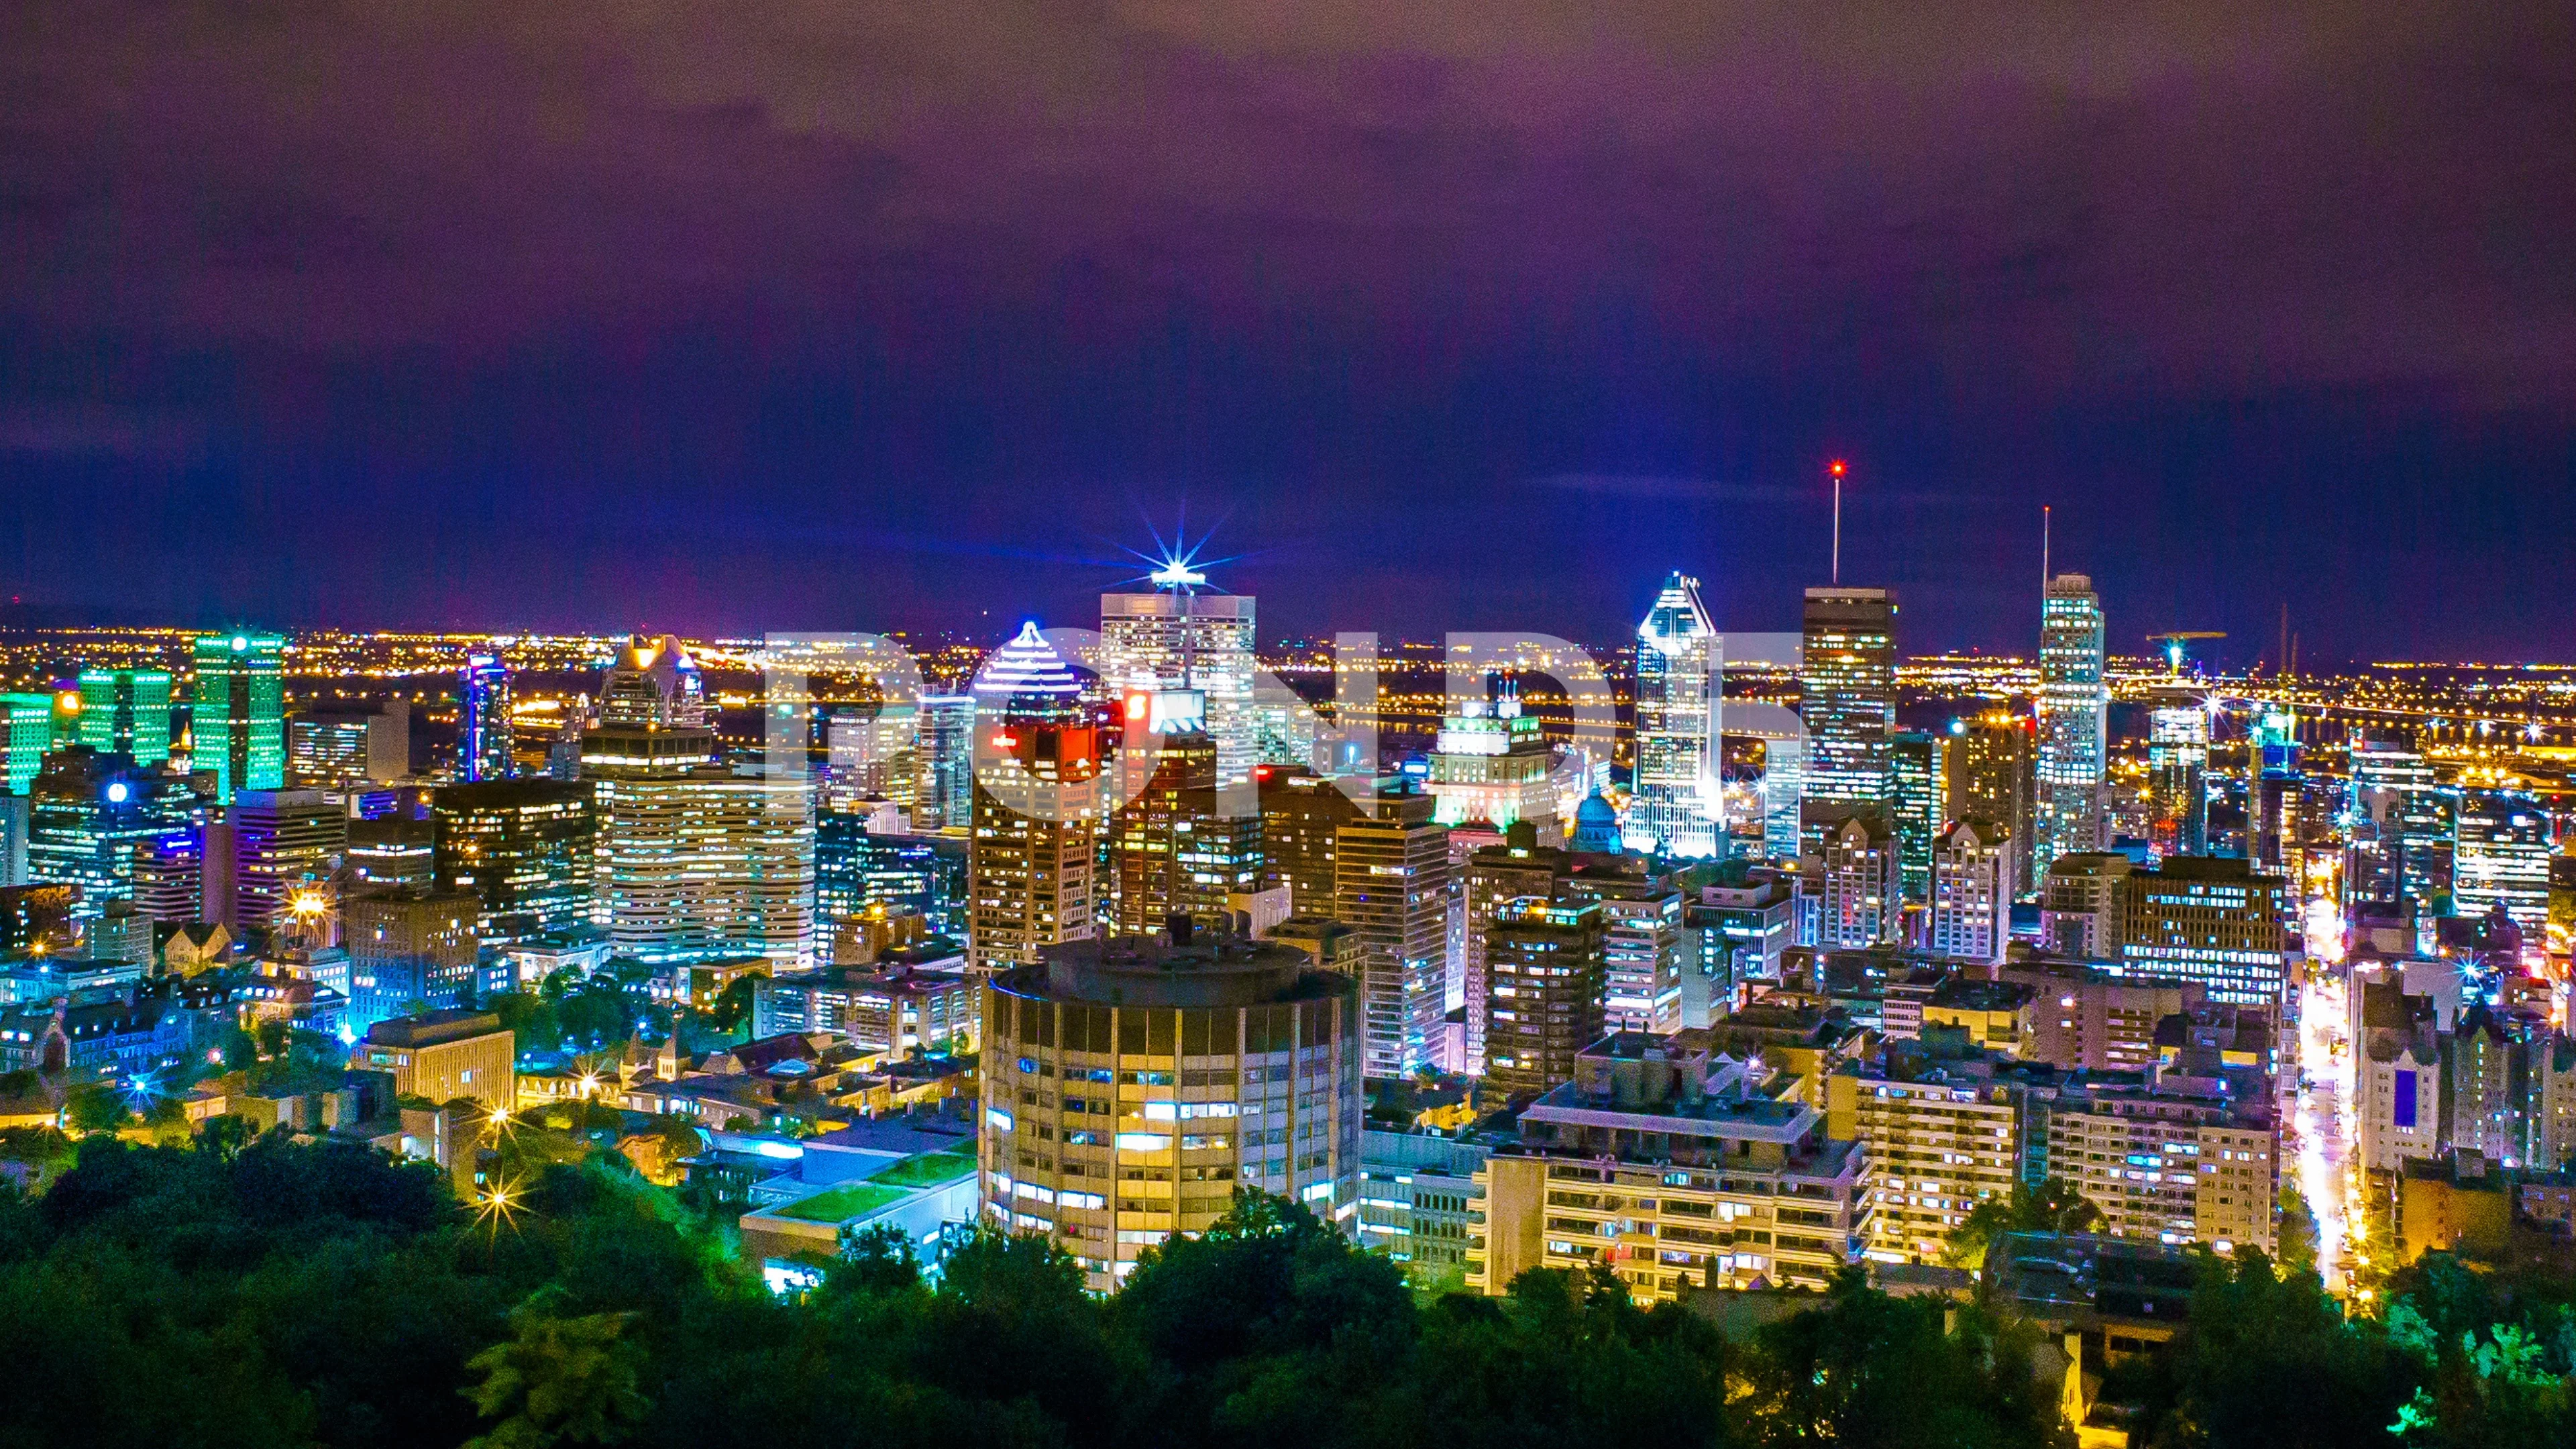 Montreal City At Night Time Lapse 4k | Stock | Pond5